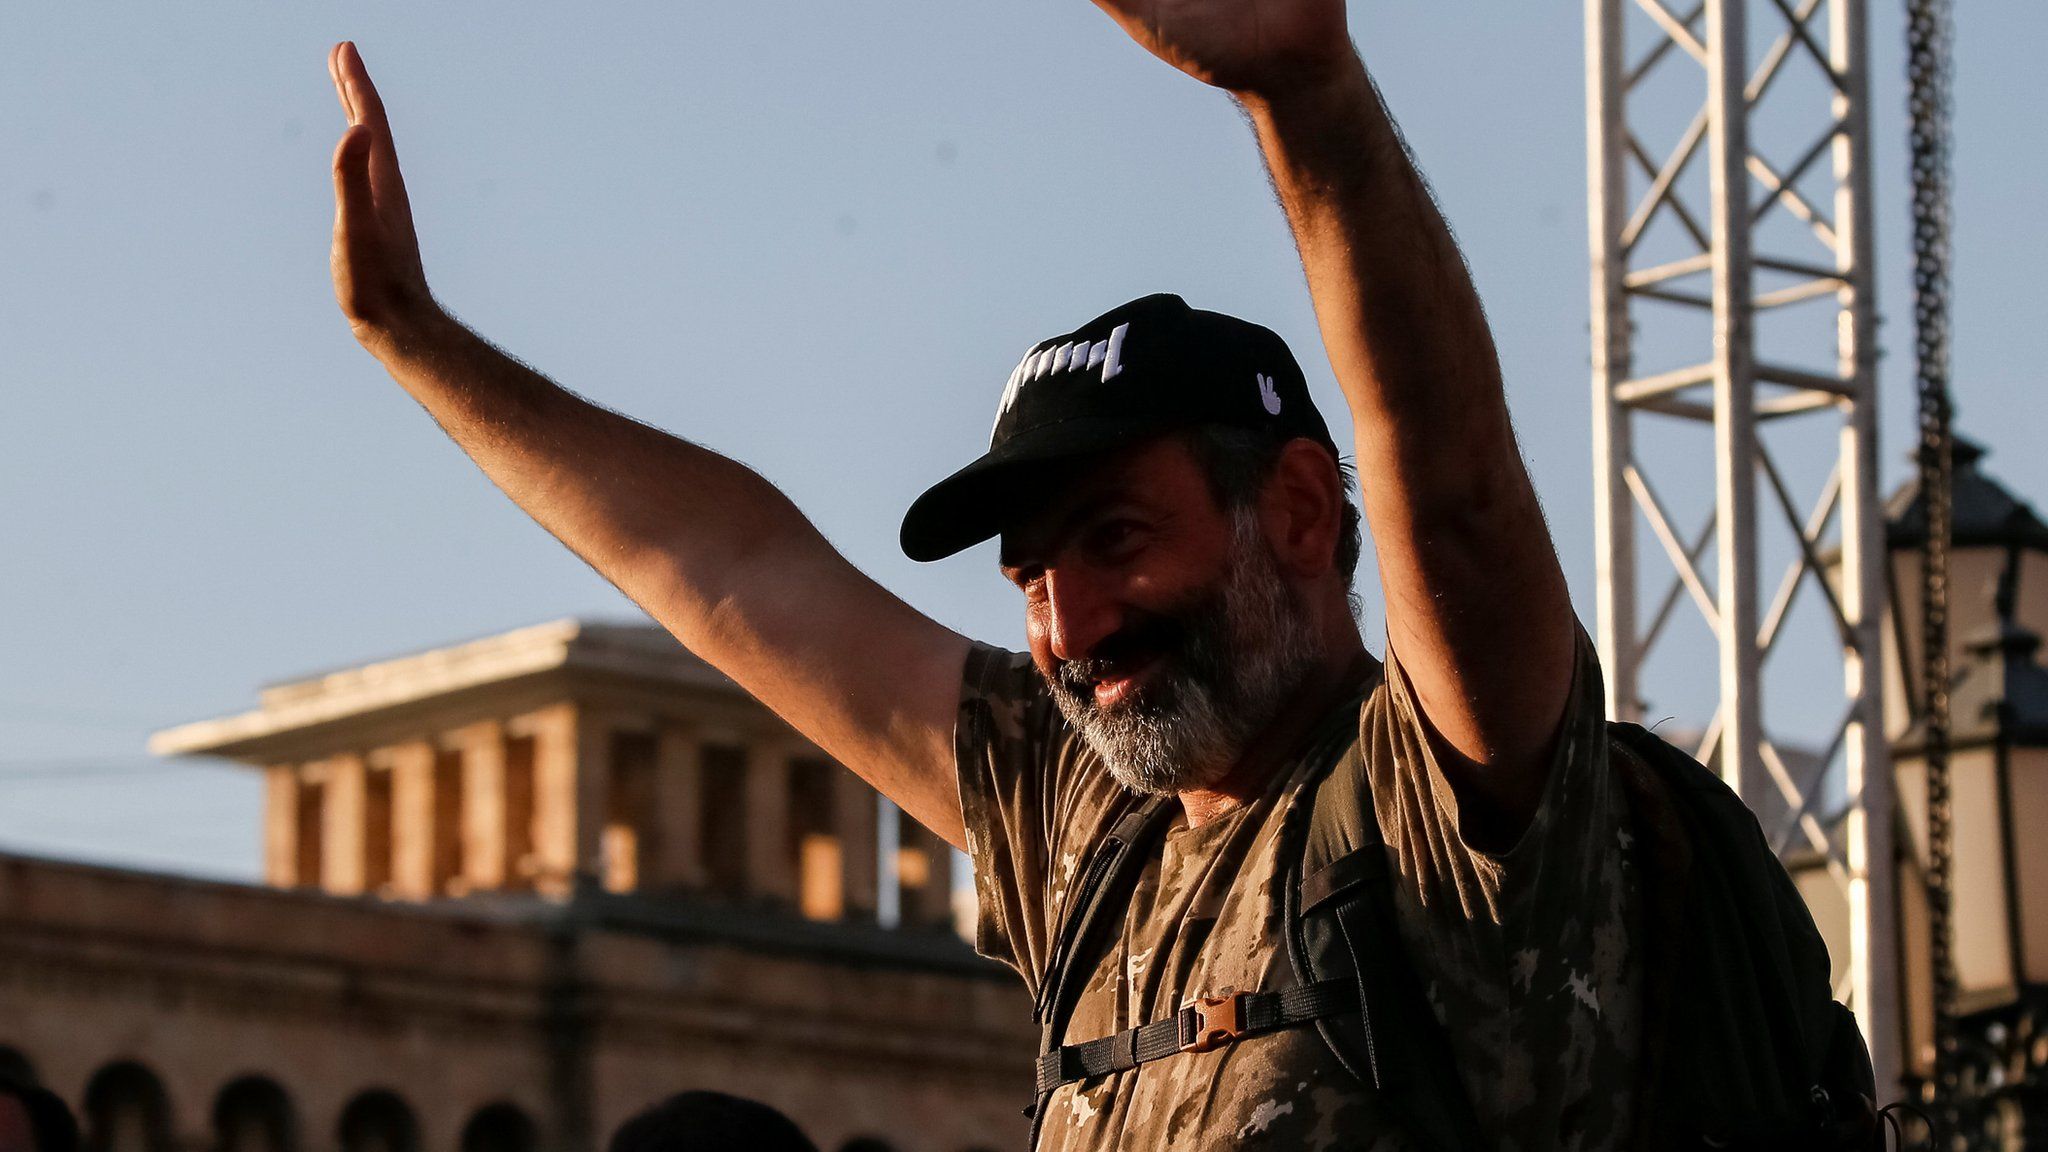 Armenian opposition leader Nikol Pashinyan waves to his supporters at a rally in Yerevan, Armenia May 2, 2018.